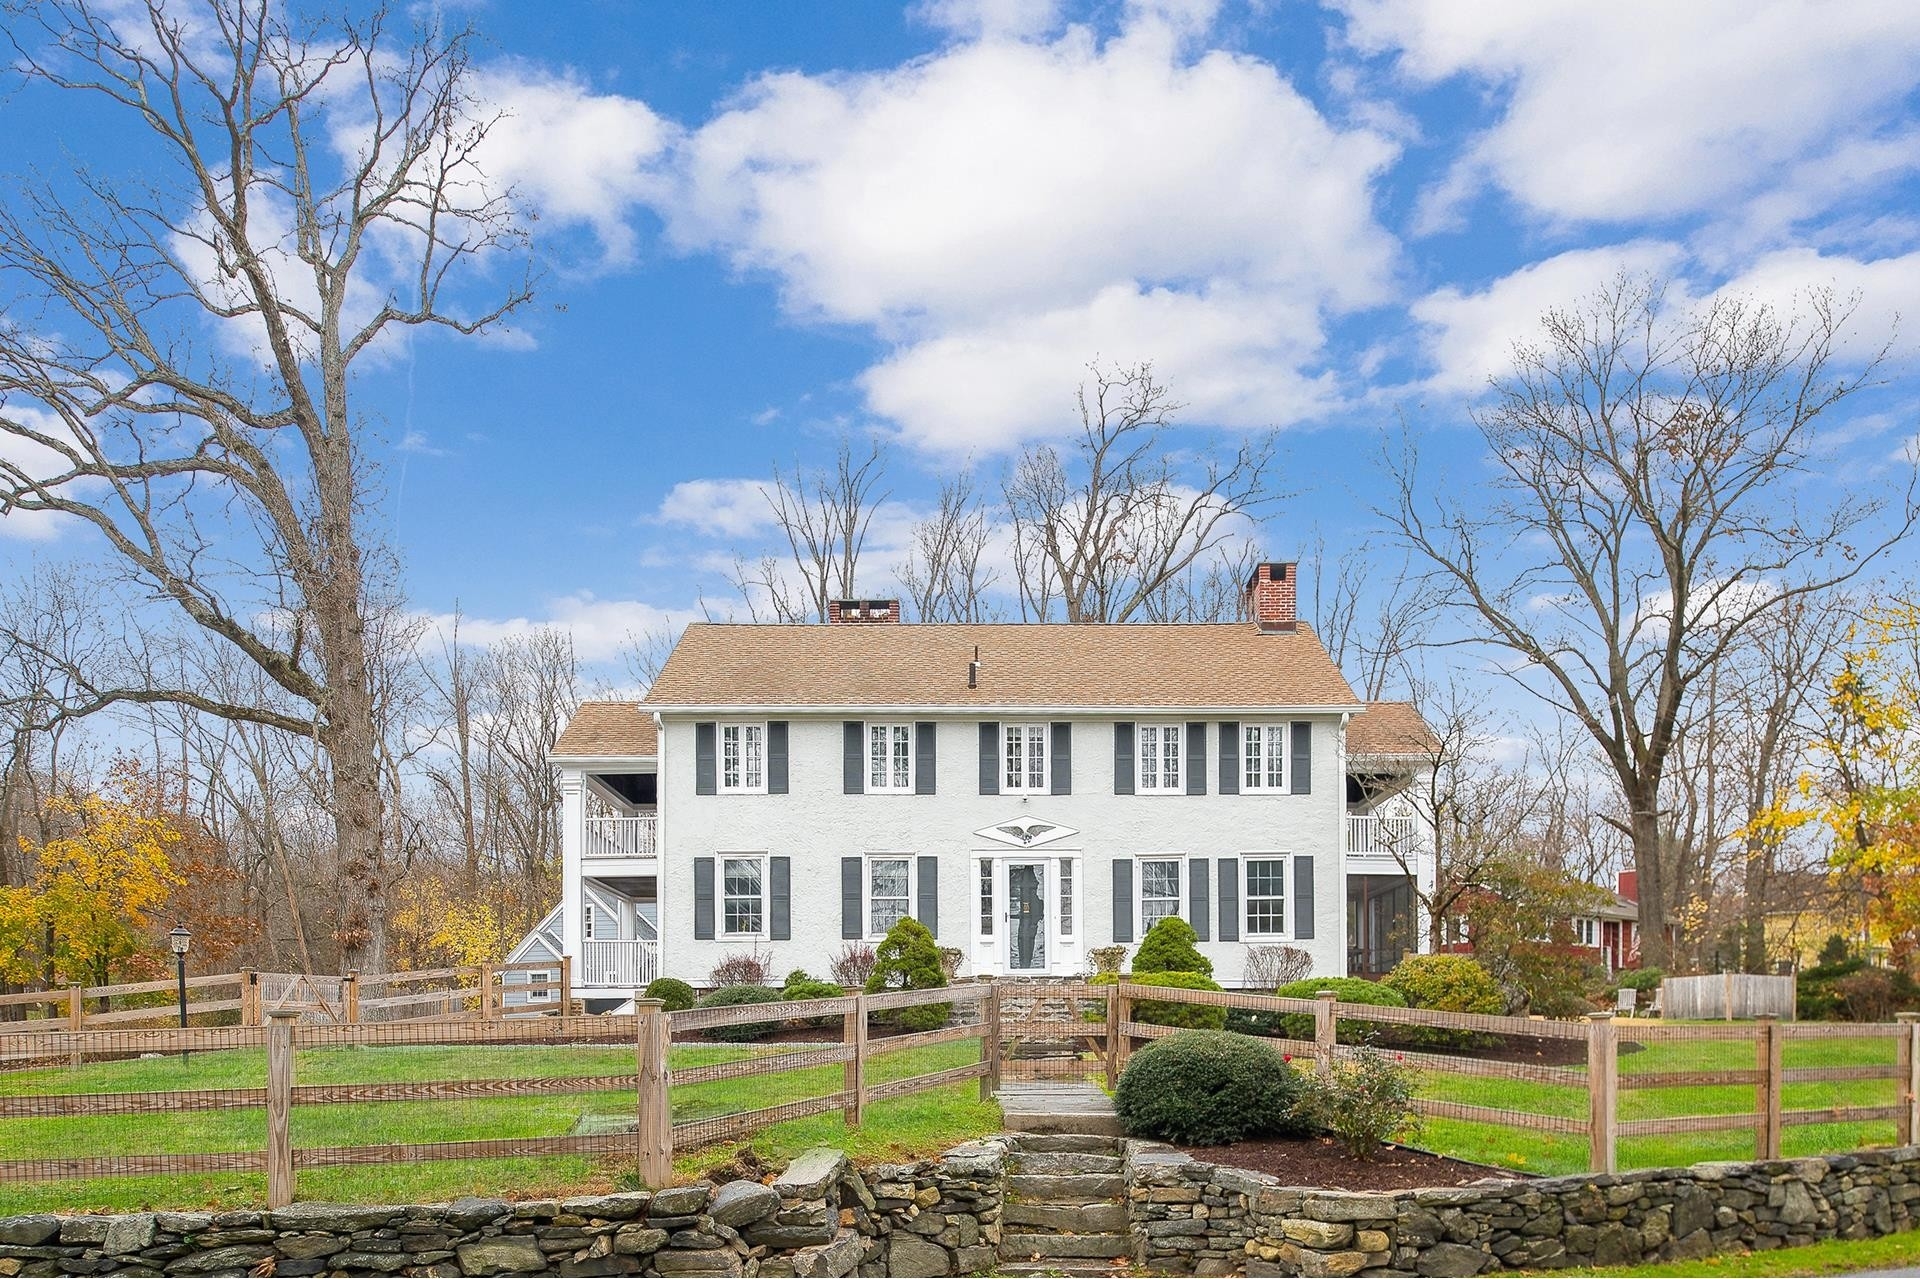 Single Family Home at Briarcliff Manor